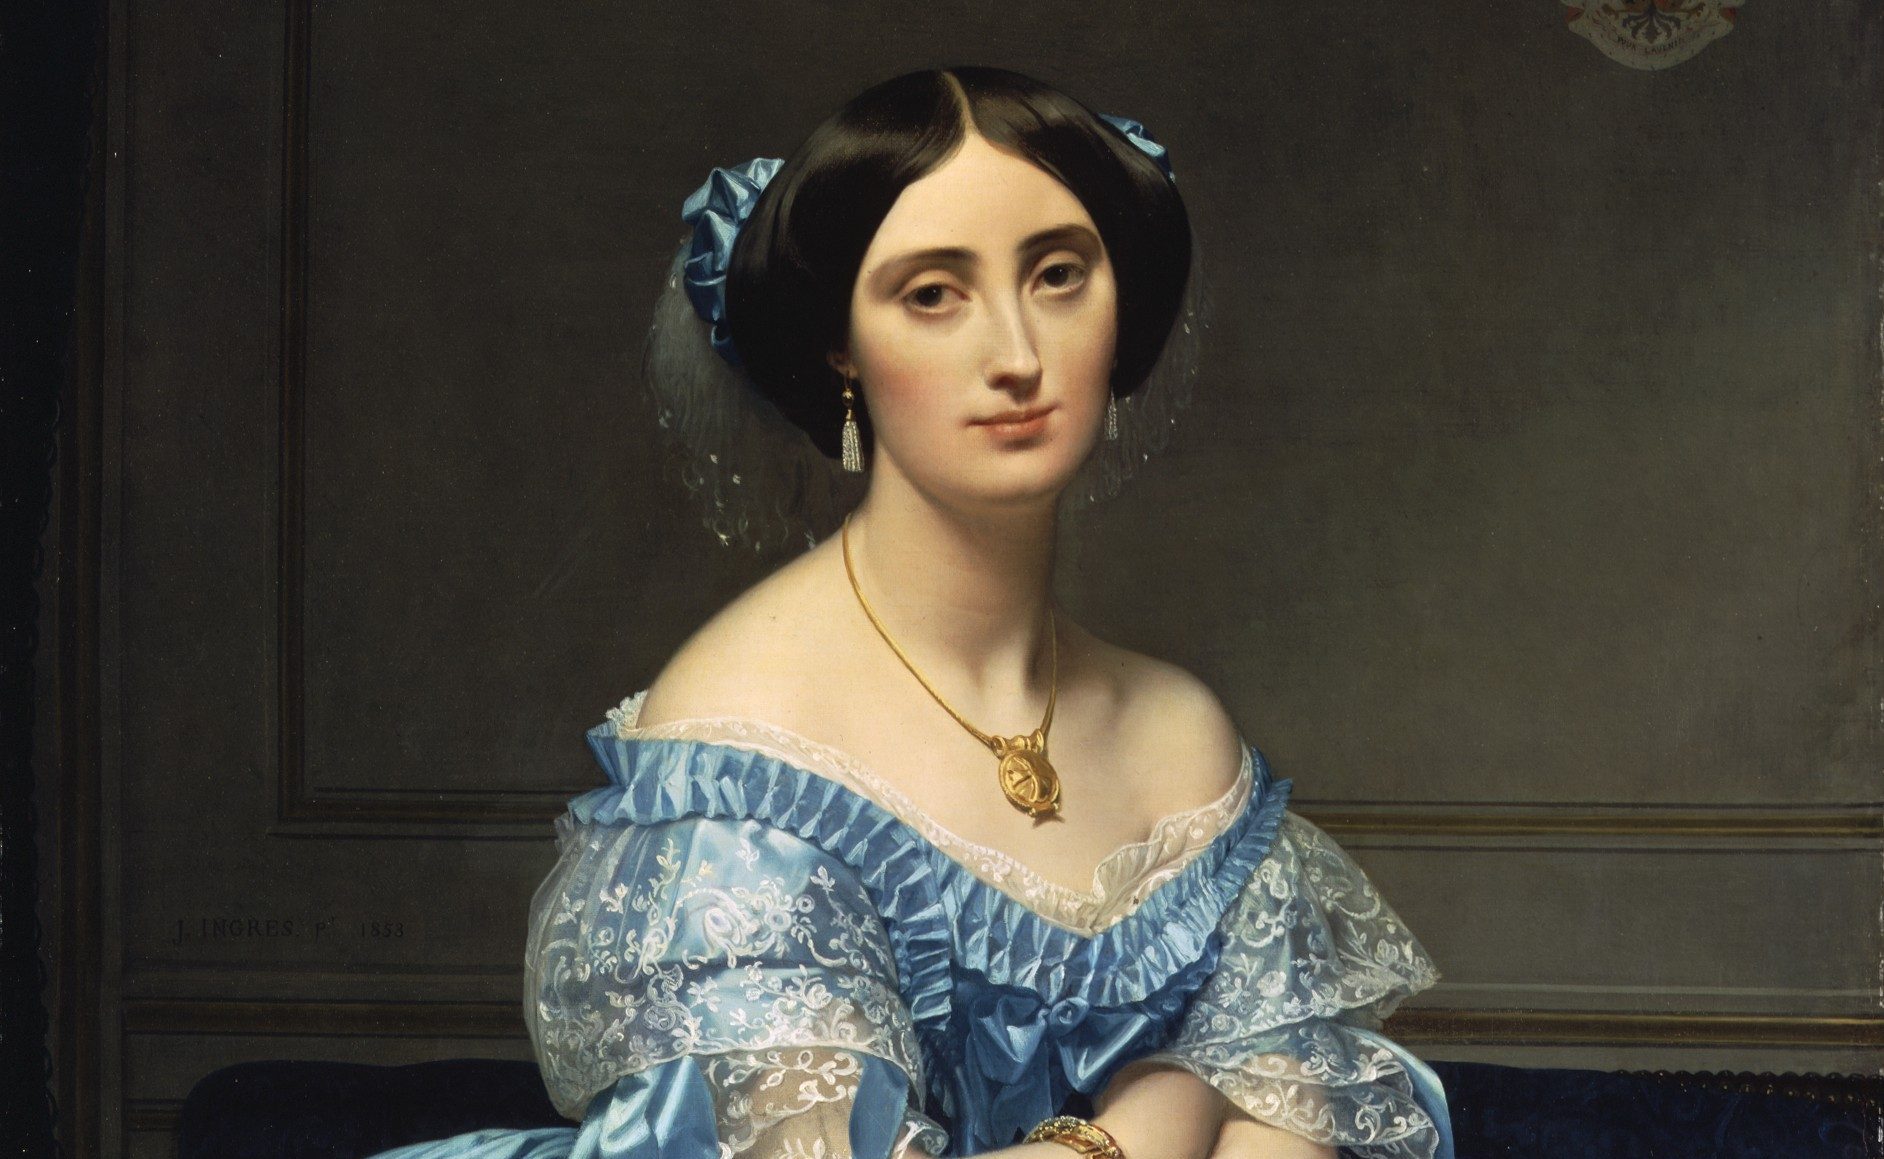 Famous Paintings of Women - The 15 Most Iconic Female Portraits